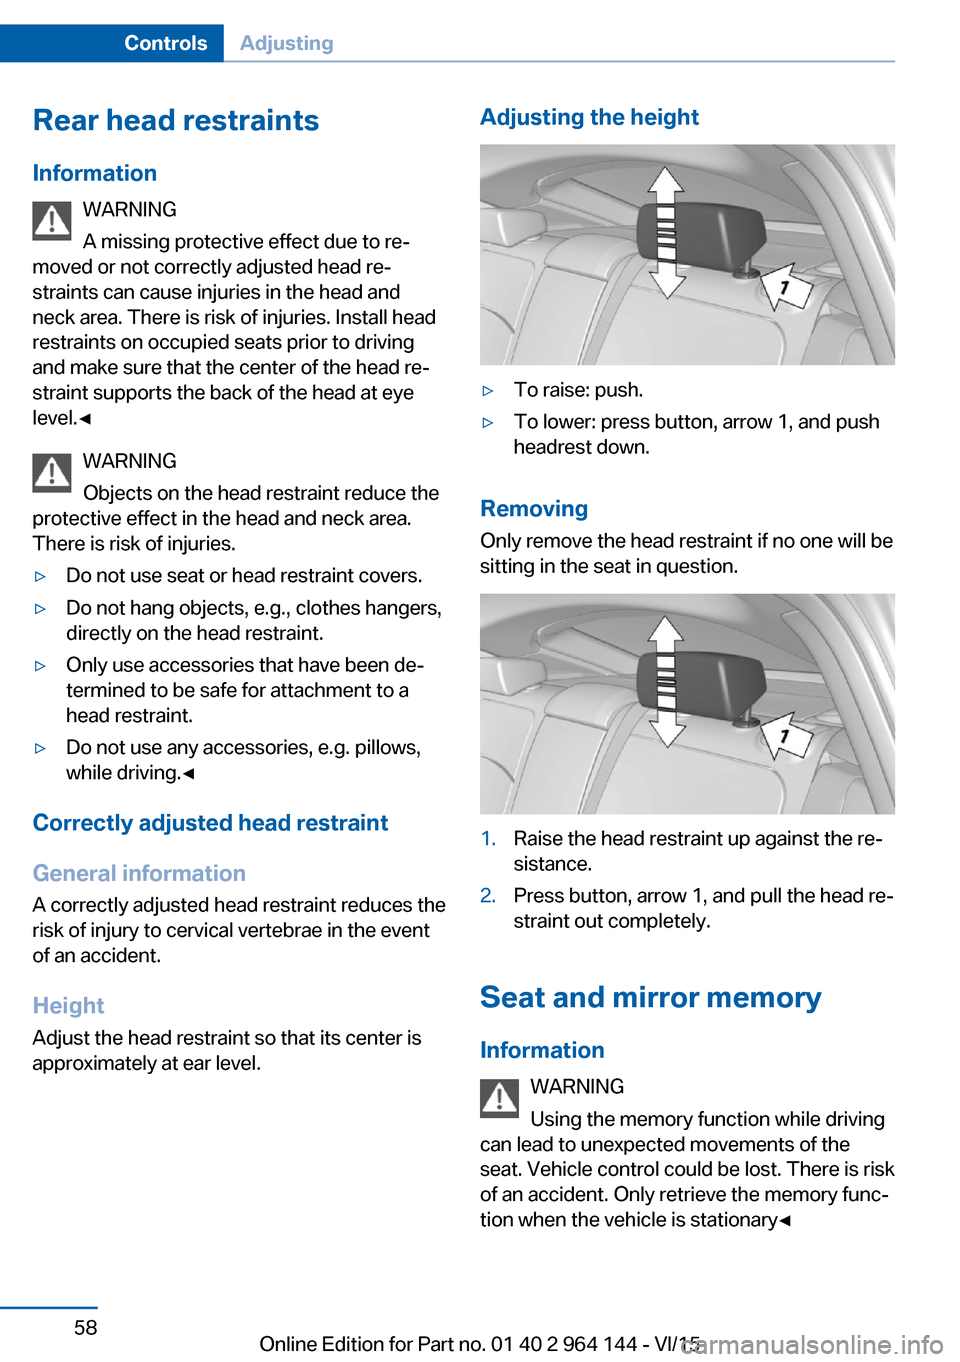 BMW X4 2015 F26 Owners Manual Rear head restraints
Information WARNING
A missing protective effect due to re‐
moved or not correctly adjusted head re‐
straints can cause injuries in the head and
neck area. There is risk of inj